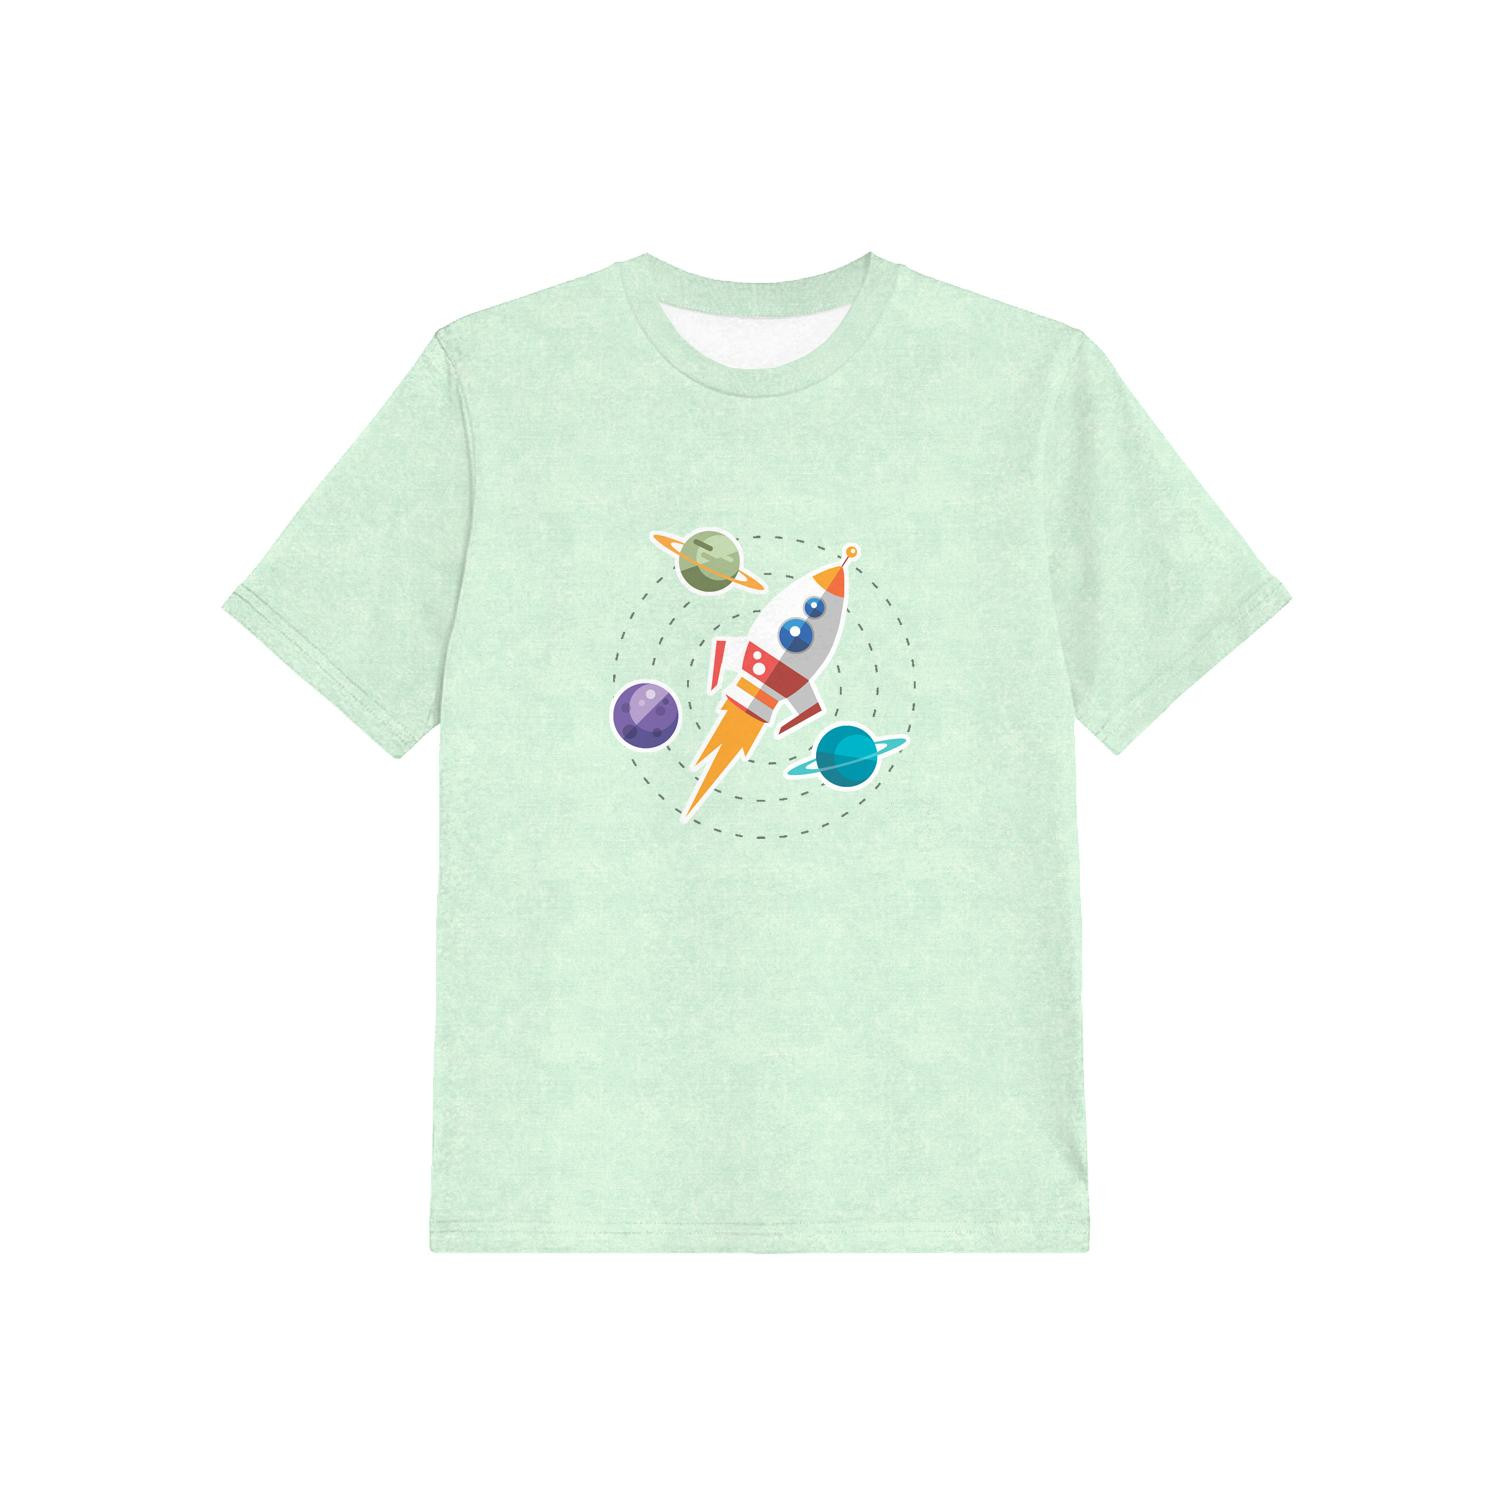 KID’S T-SHIRT - ROCKET AND PLANETS (SPACE EXPEDITION) / ACID WASH MINT - single jersey